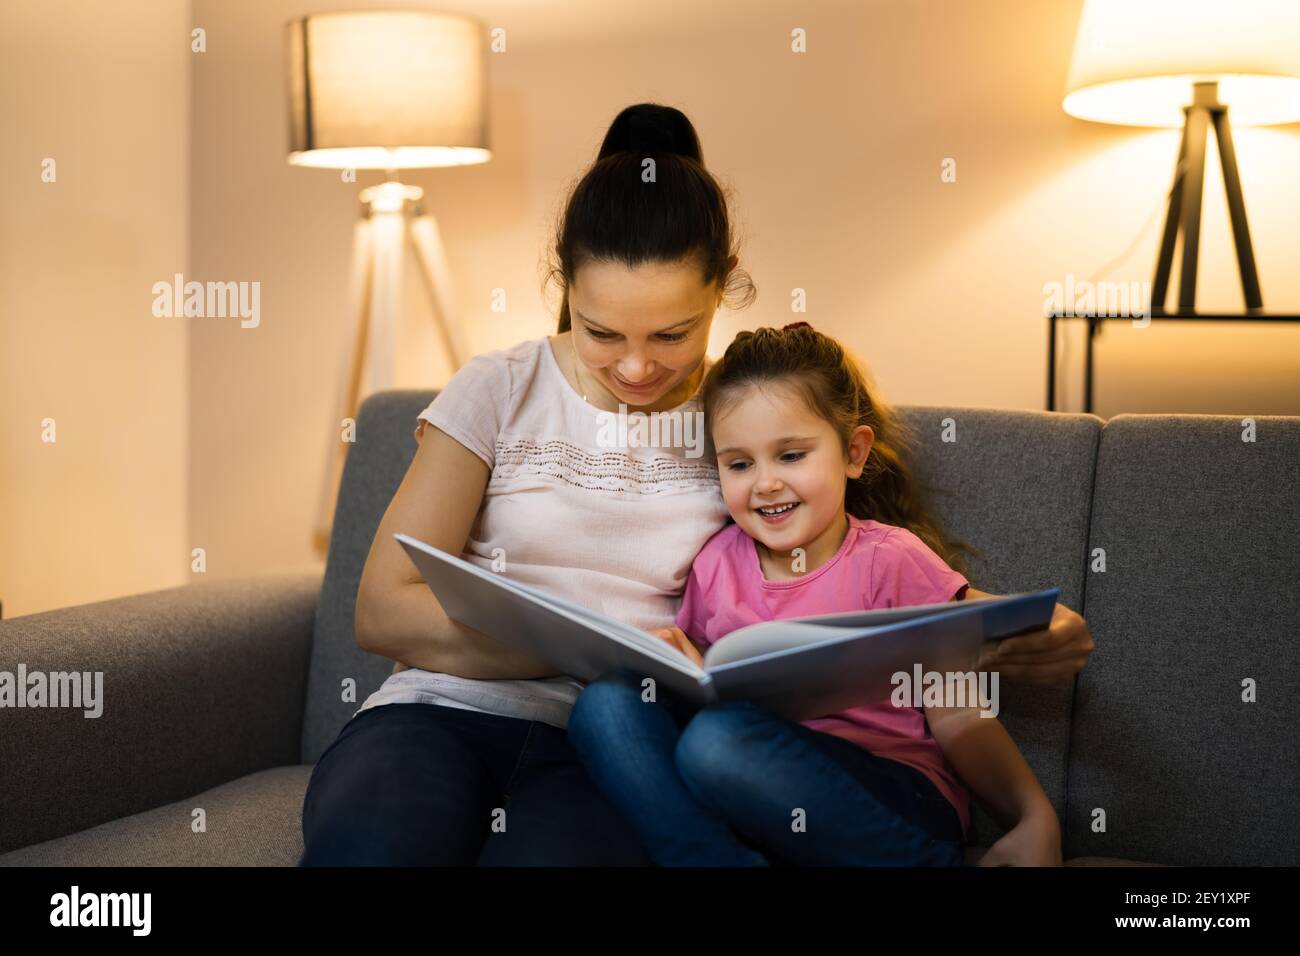 Bedtime Family Story In Evening At Home Stock Photo